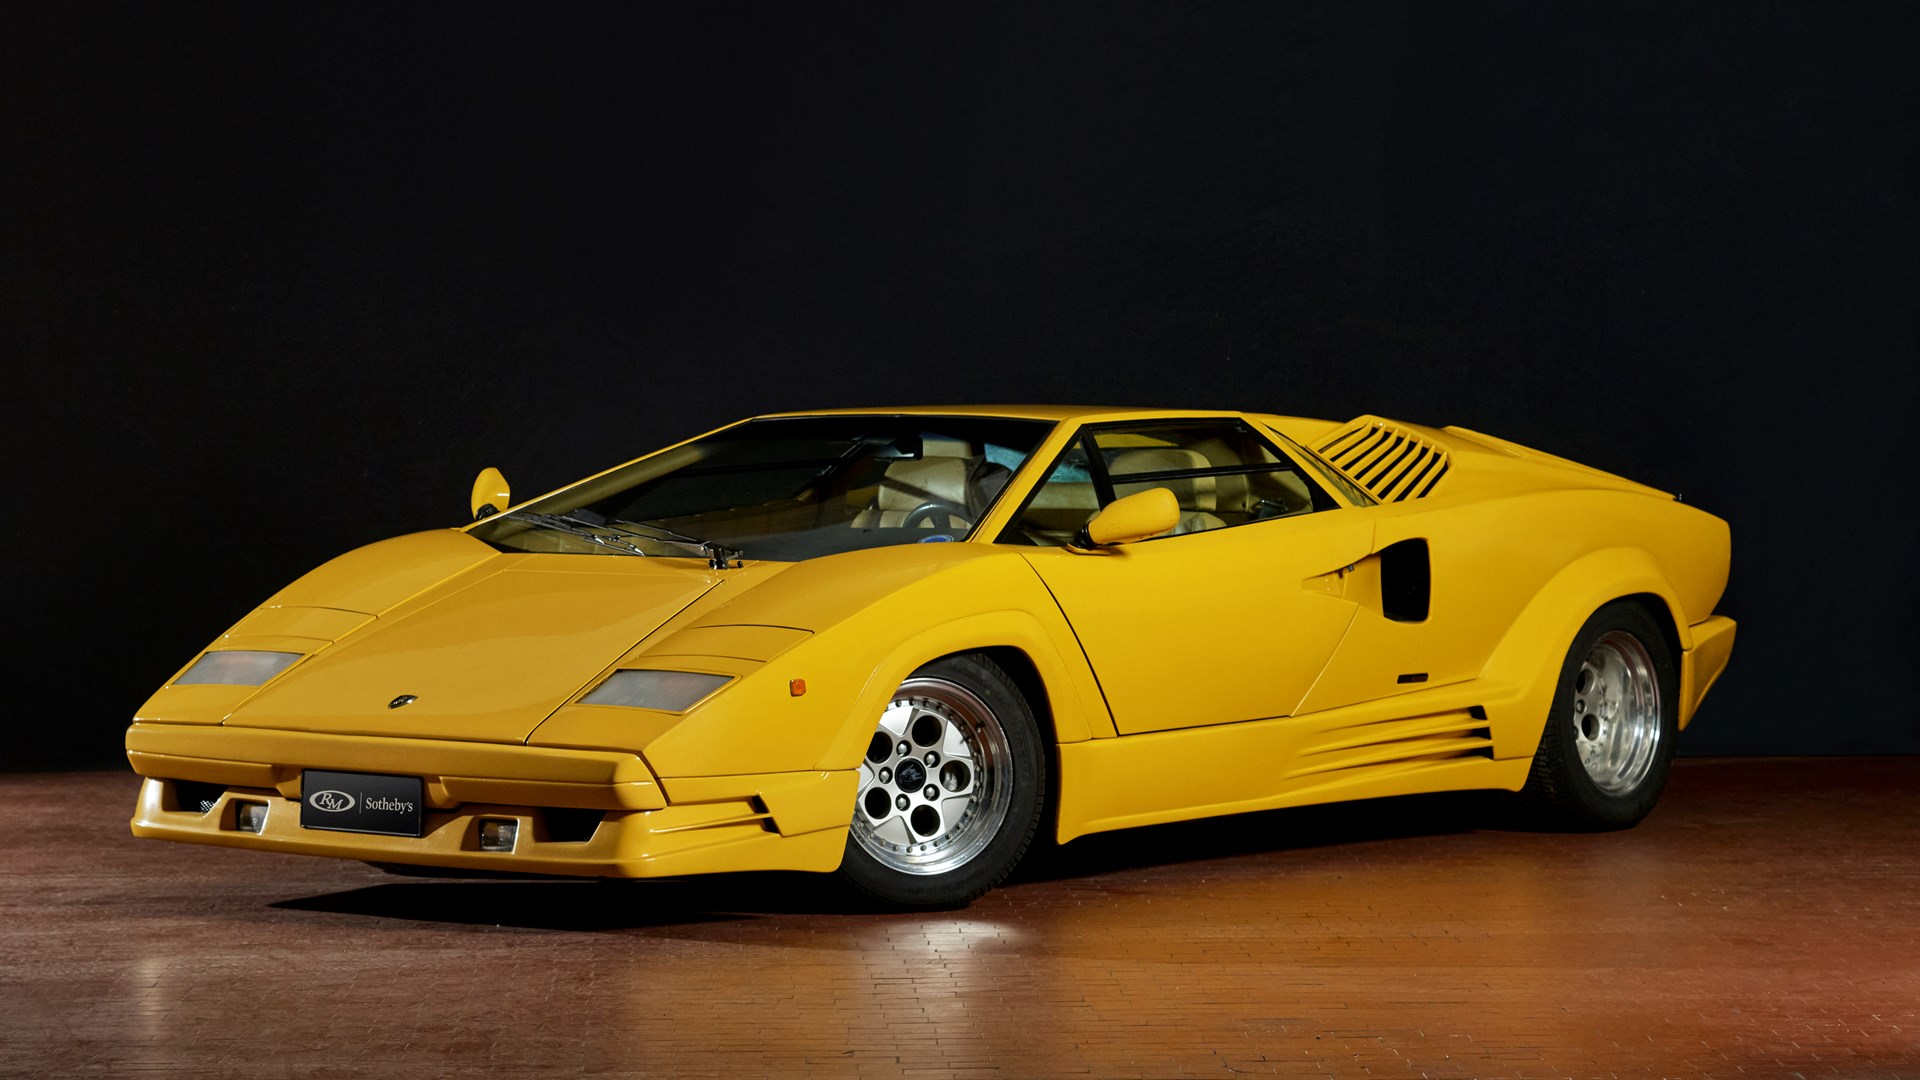 1982 Lamborghini Countach Uncovered After 20 Years Has Fascinating History